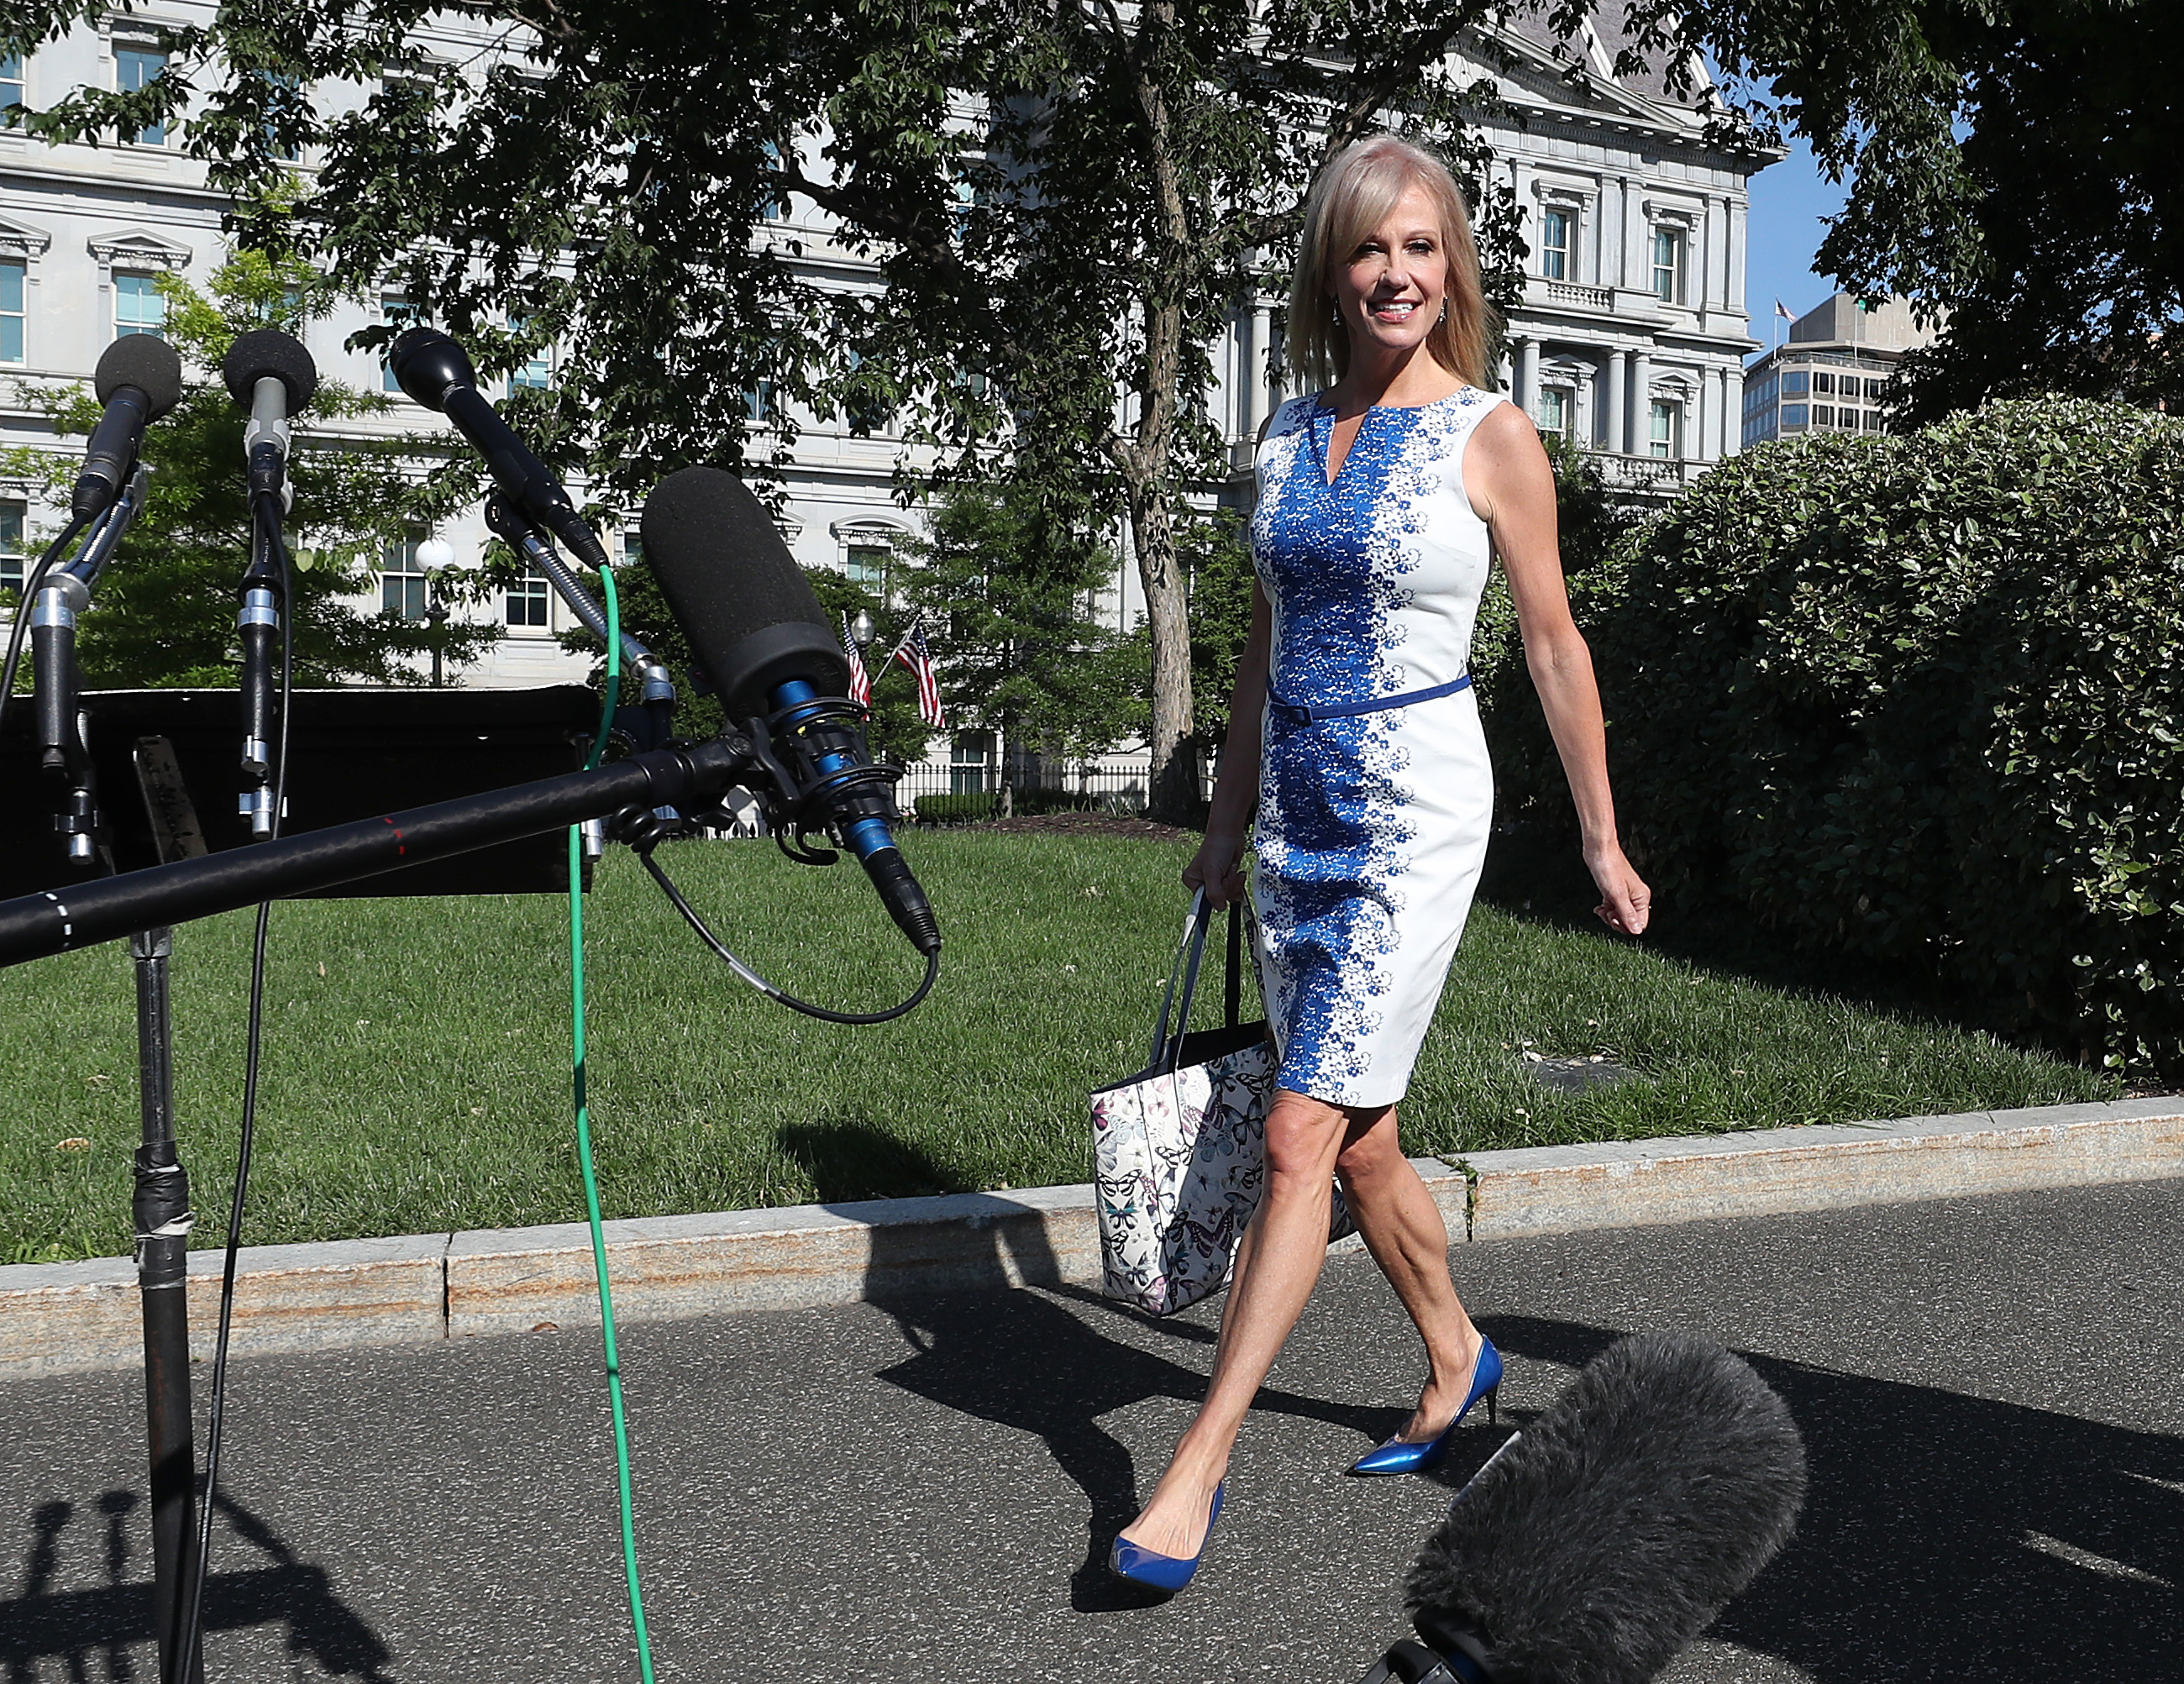 WASHINGTON, DC - JUNE 24: White House Counselor Kellyanne Conway walks up to the media after appearing on a morning talk show on the North Lawn of the White House, on June 24, 2019 in Washington, DC. Conway has been under fire for allegedly violating the Hatch Act. (Photo by Mark Wilson/Getty Images)